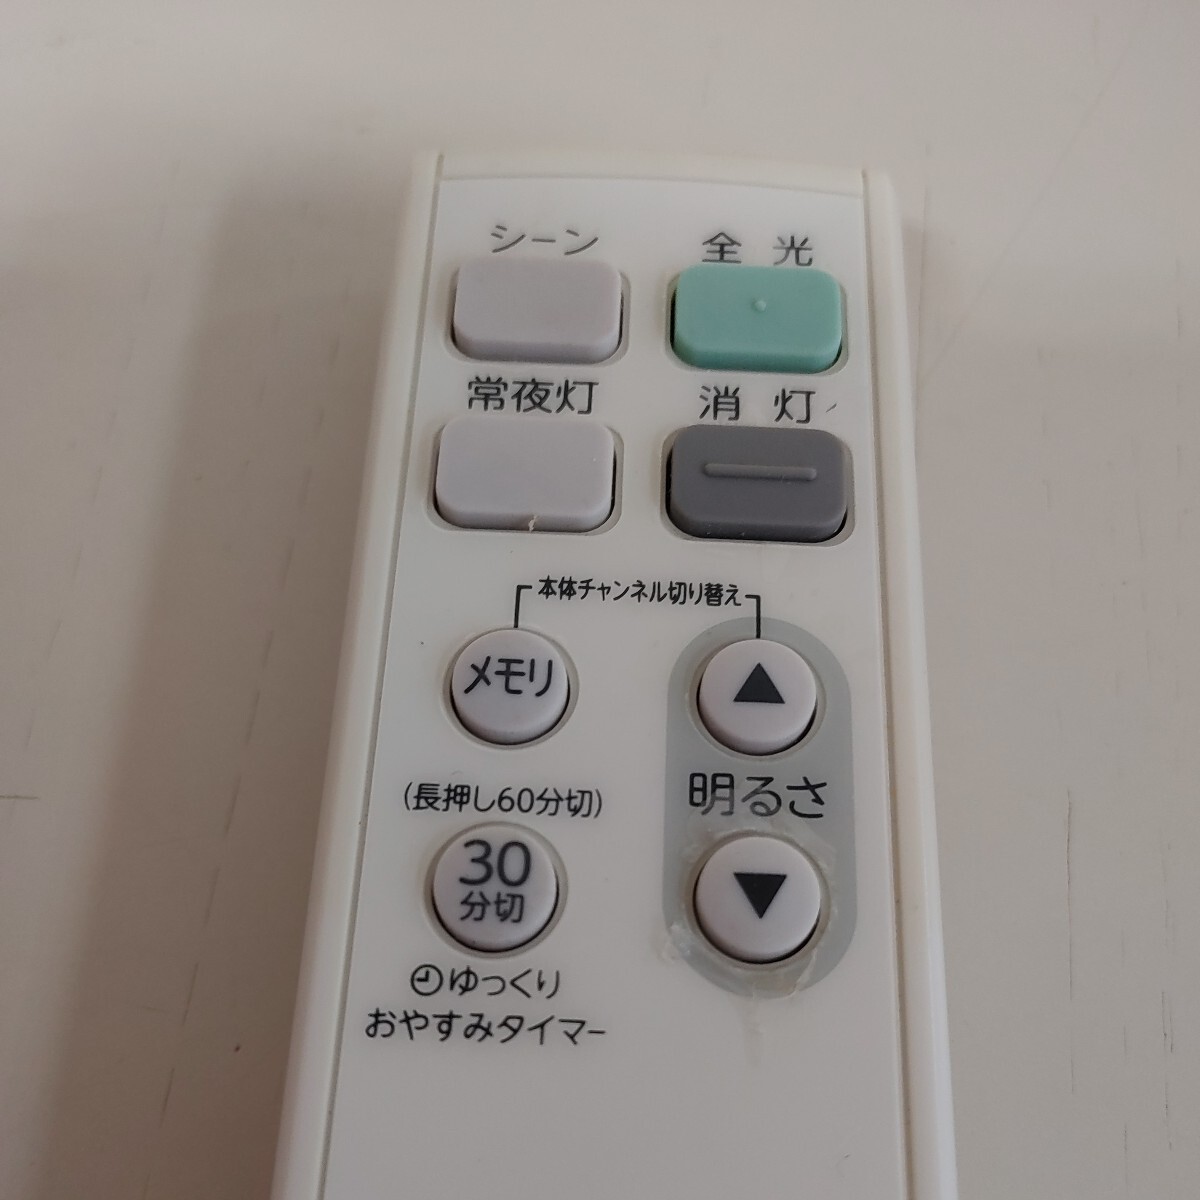 [ Toshiba remote control ceiling light for ] lighting remote control FRC-203T operation verification ending body only secondhand goods TOSHIBA[B3-3①]0506